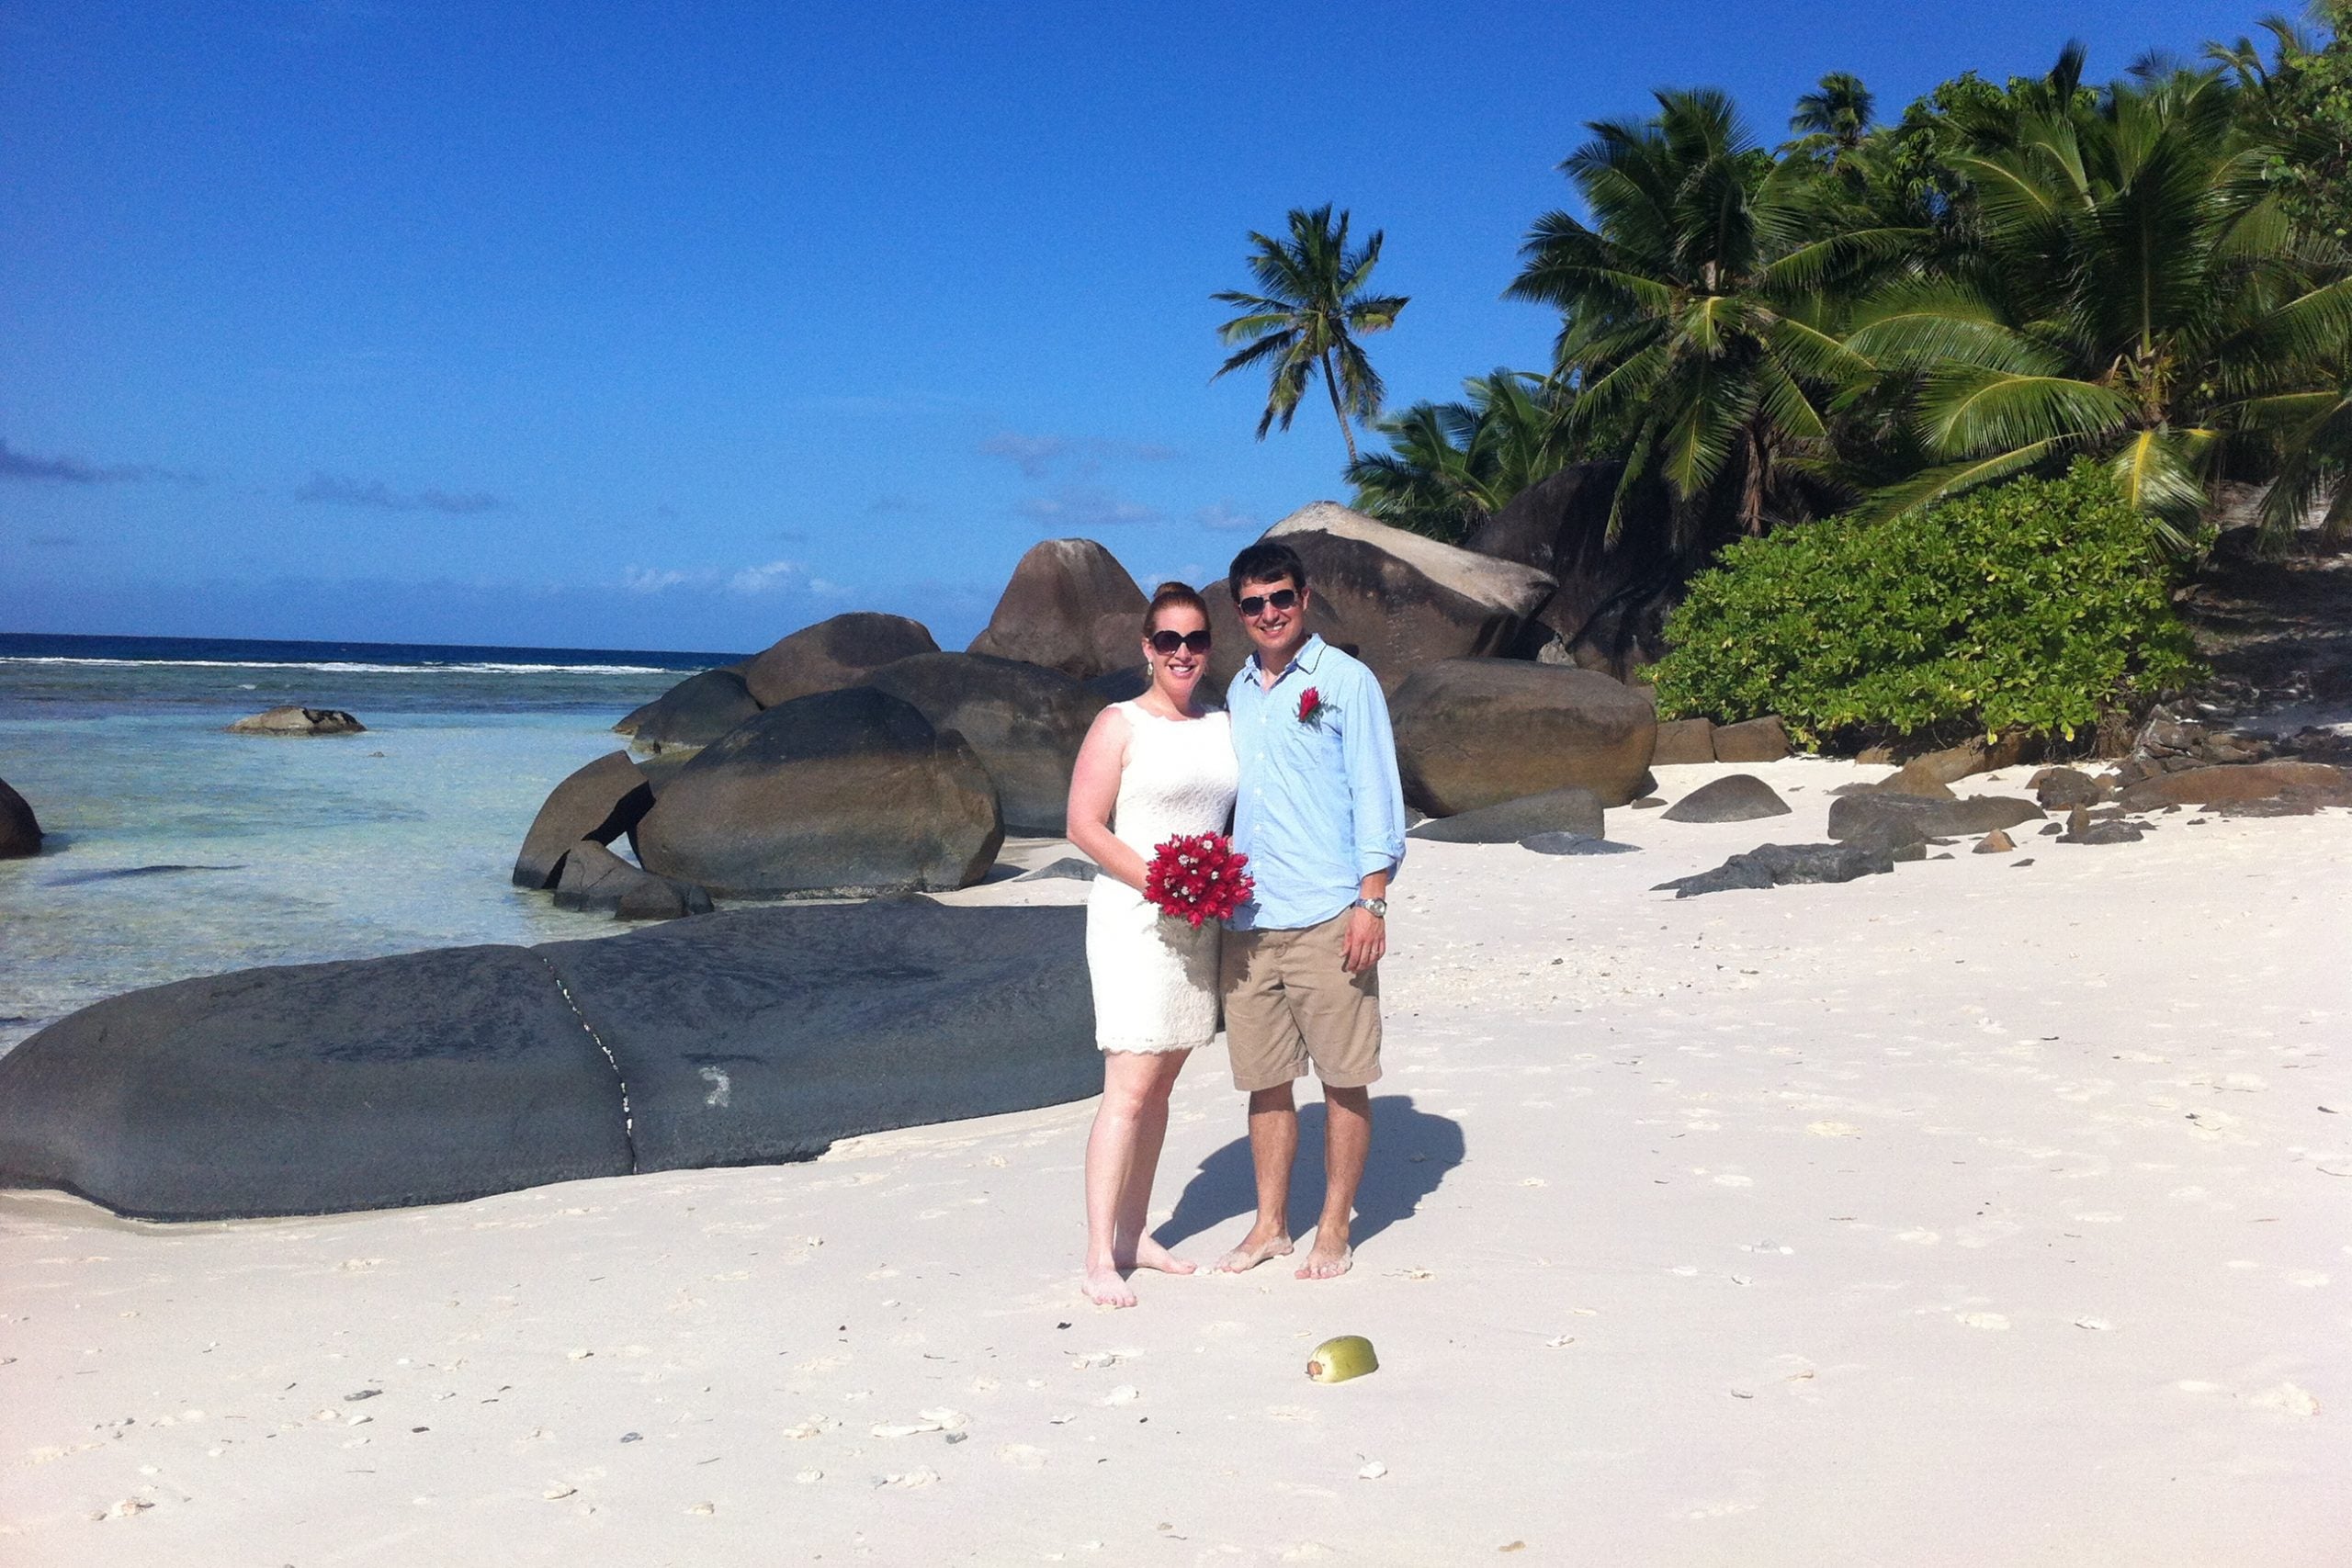 TPG Editor Nick Ewen and his wife during their vow renewal in the Seychelles